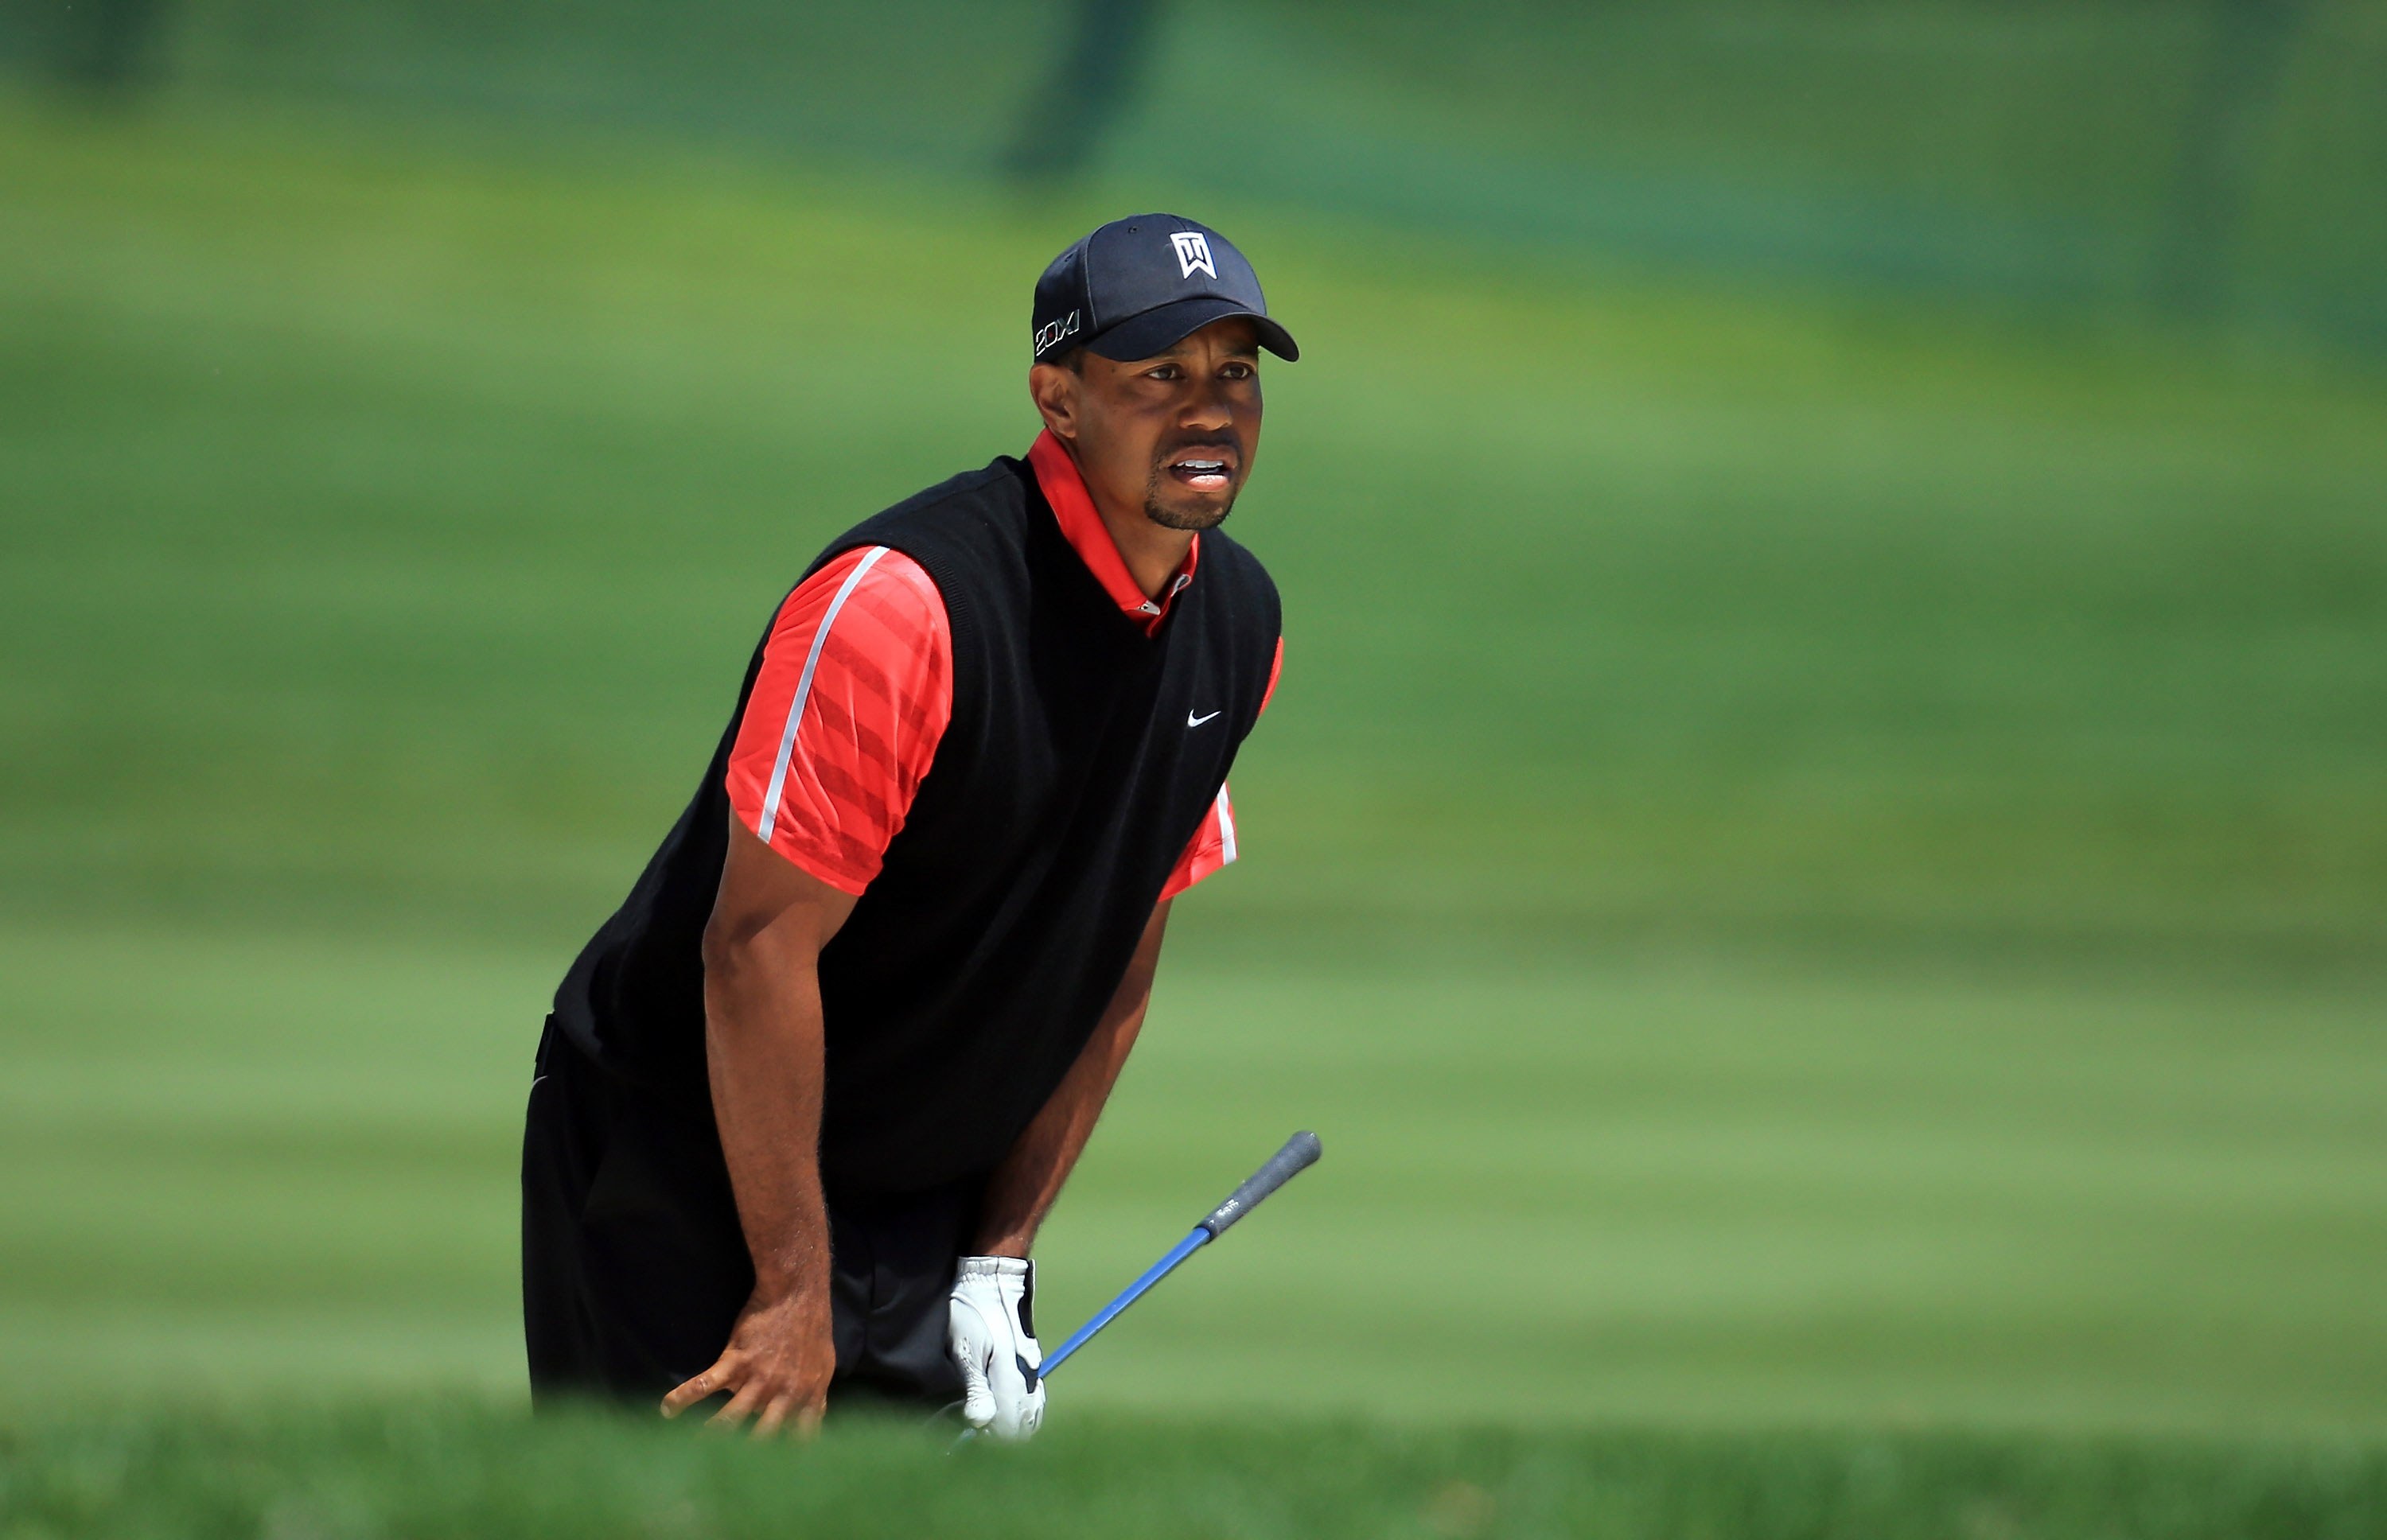 Tiger Woods Wallpapers High Quality | Download Free